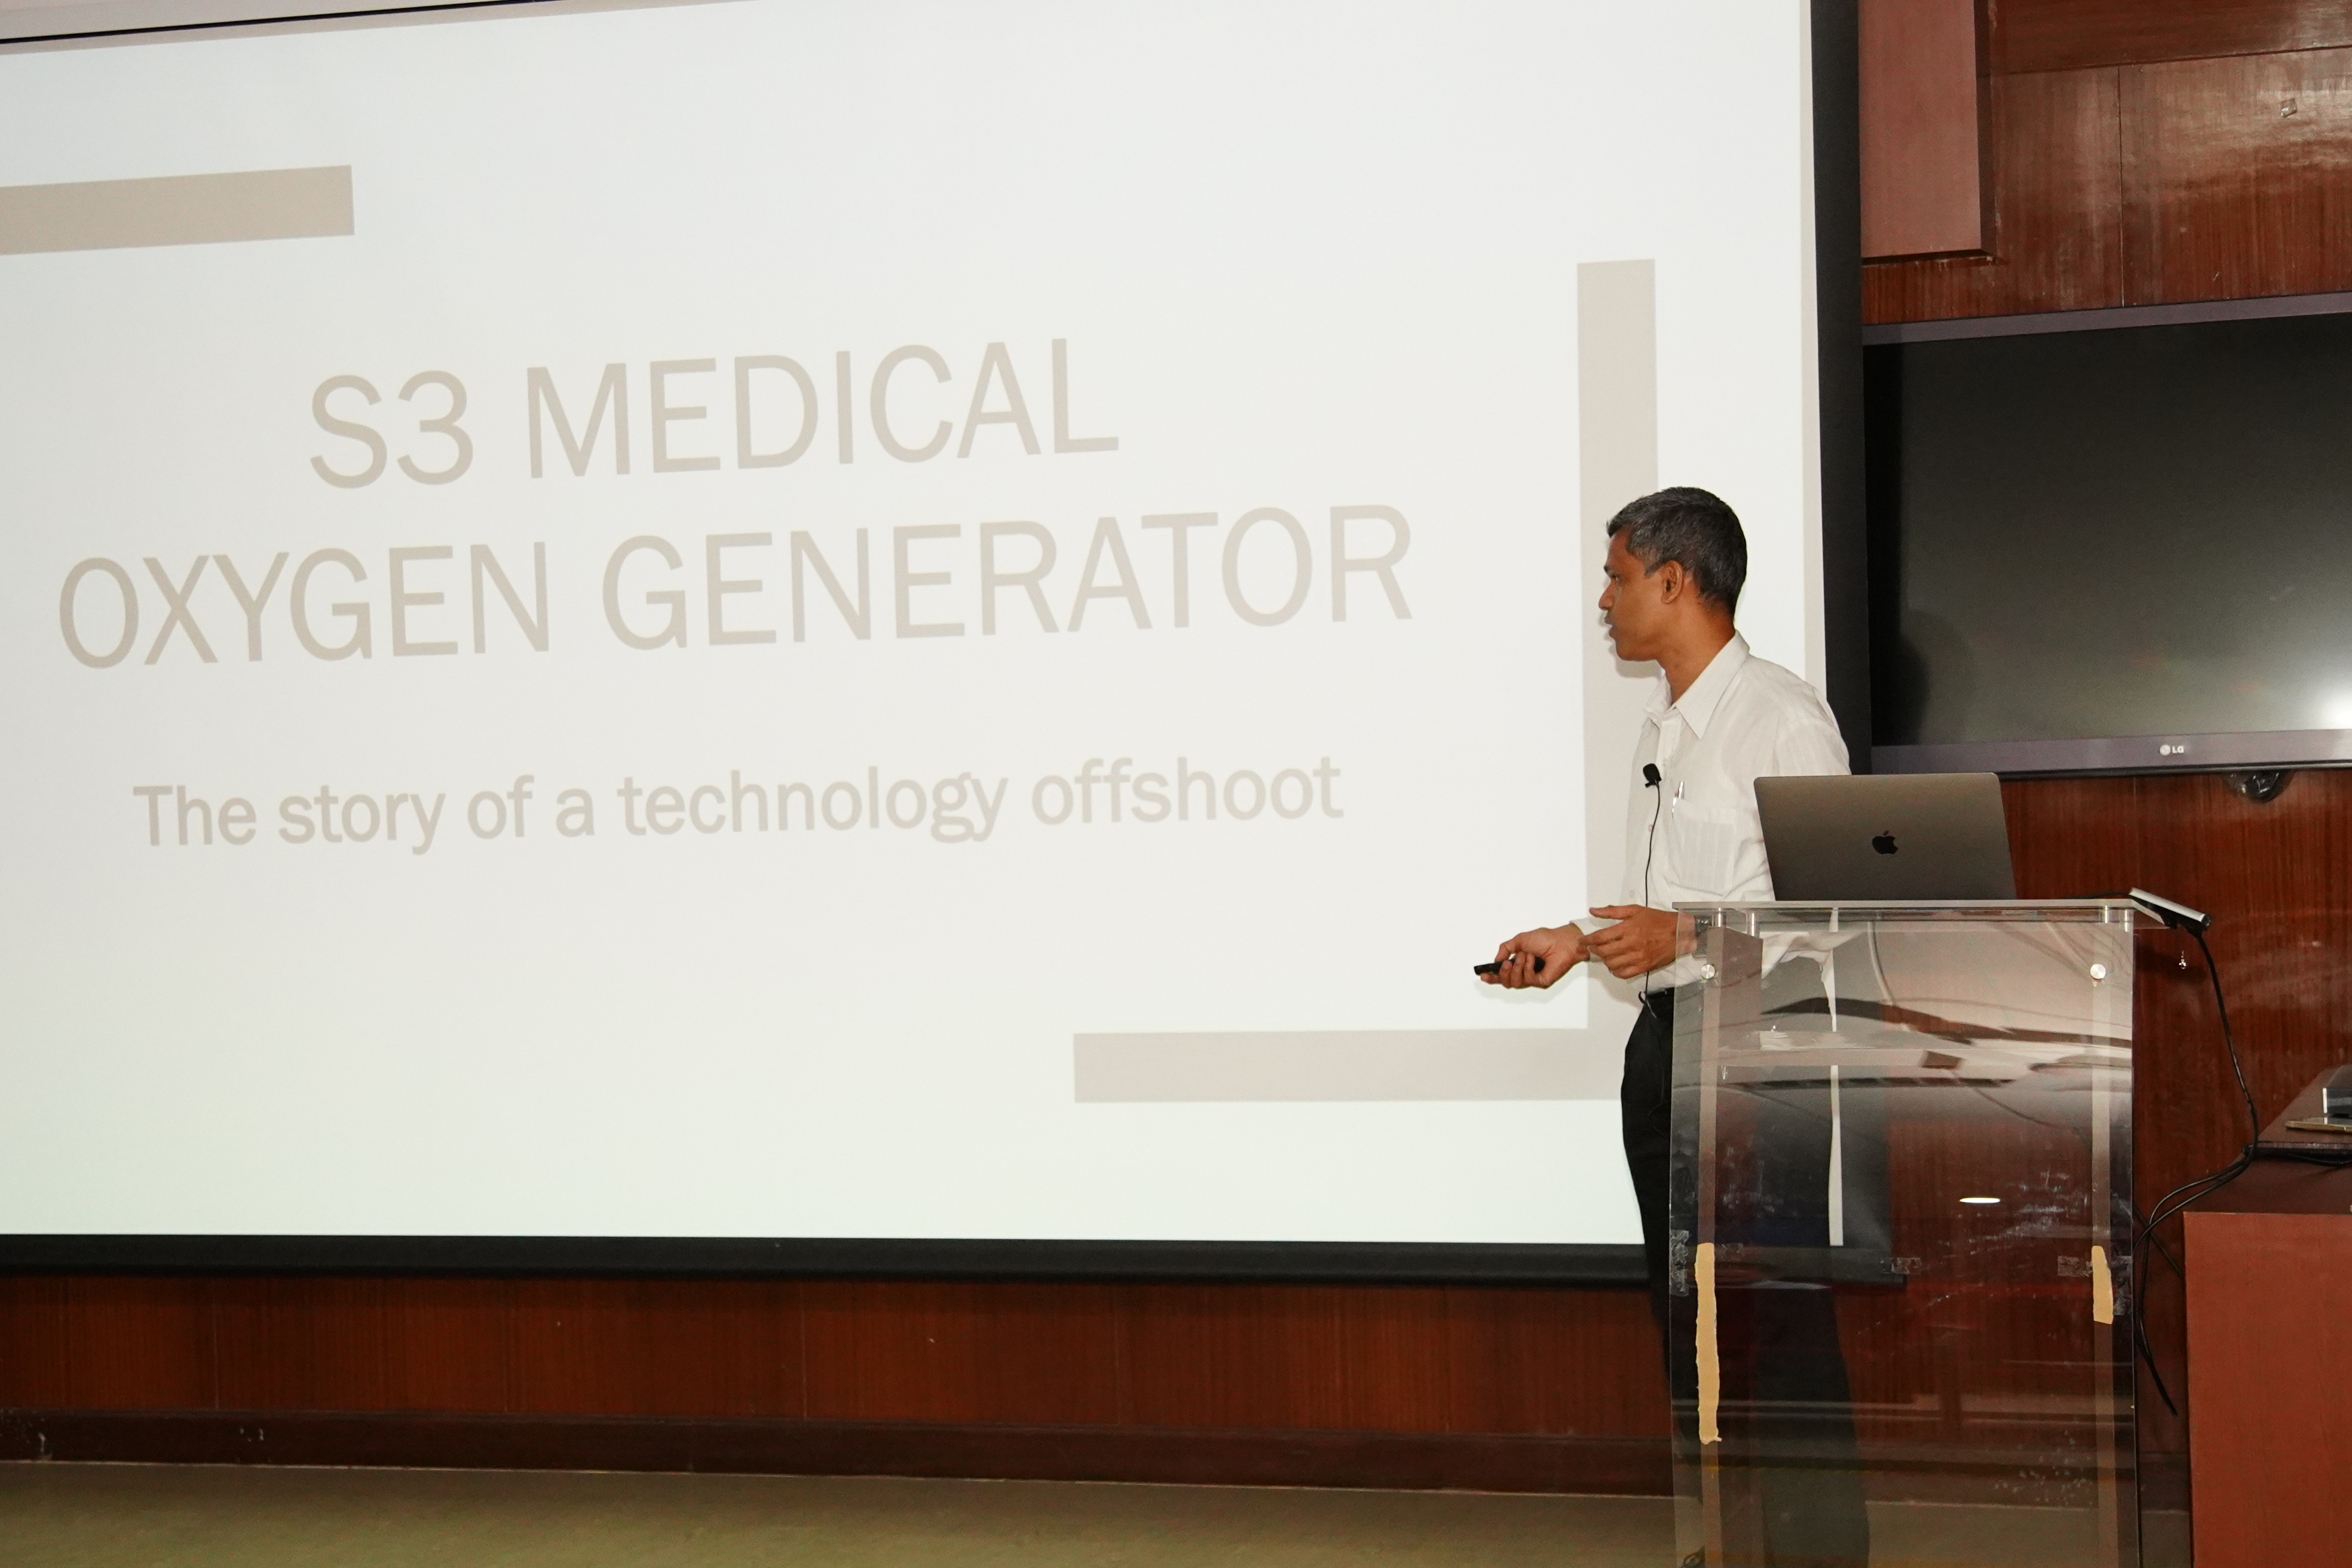 Anand MS talks about their S3 medical oxygen generator